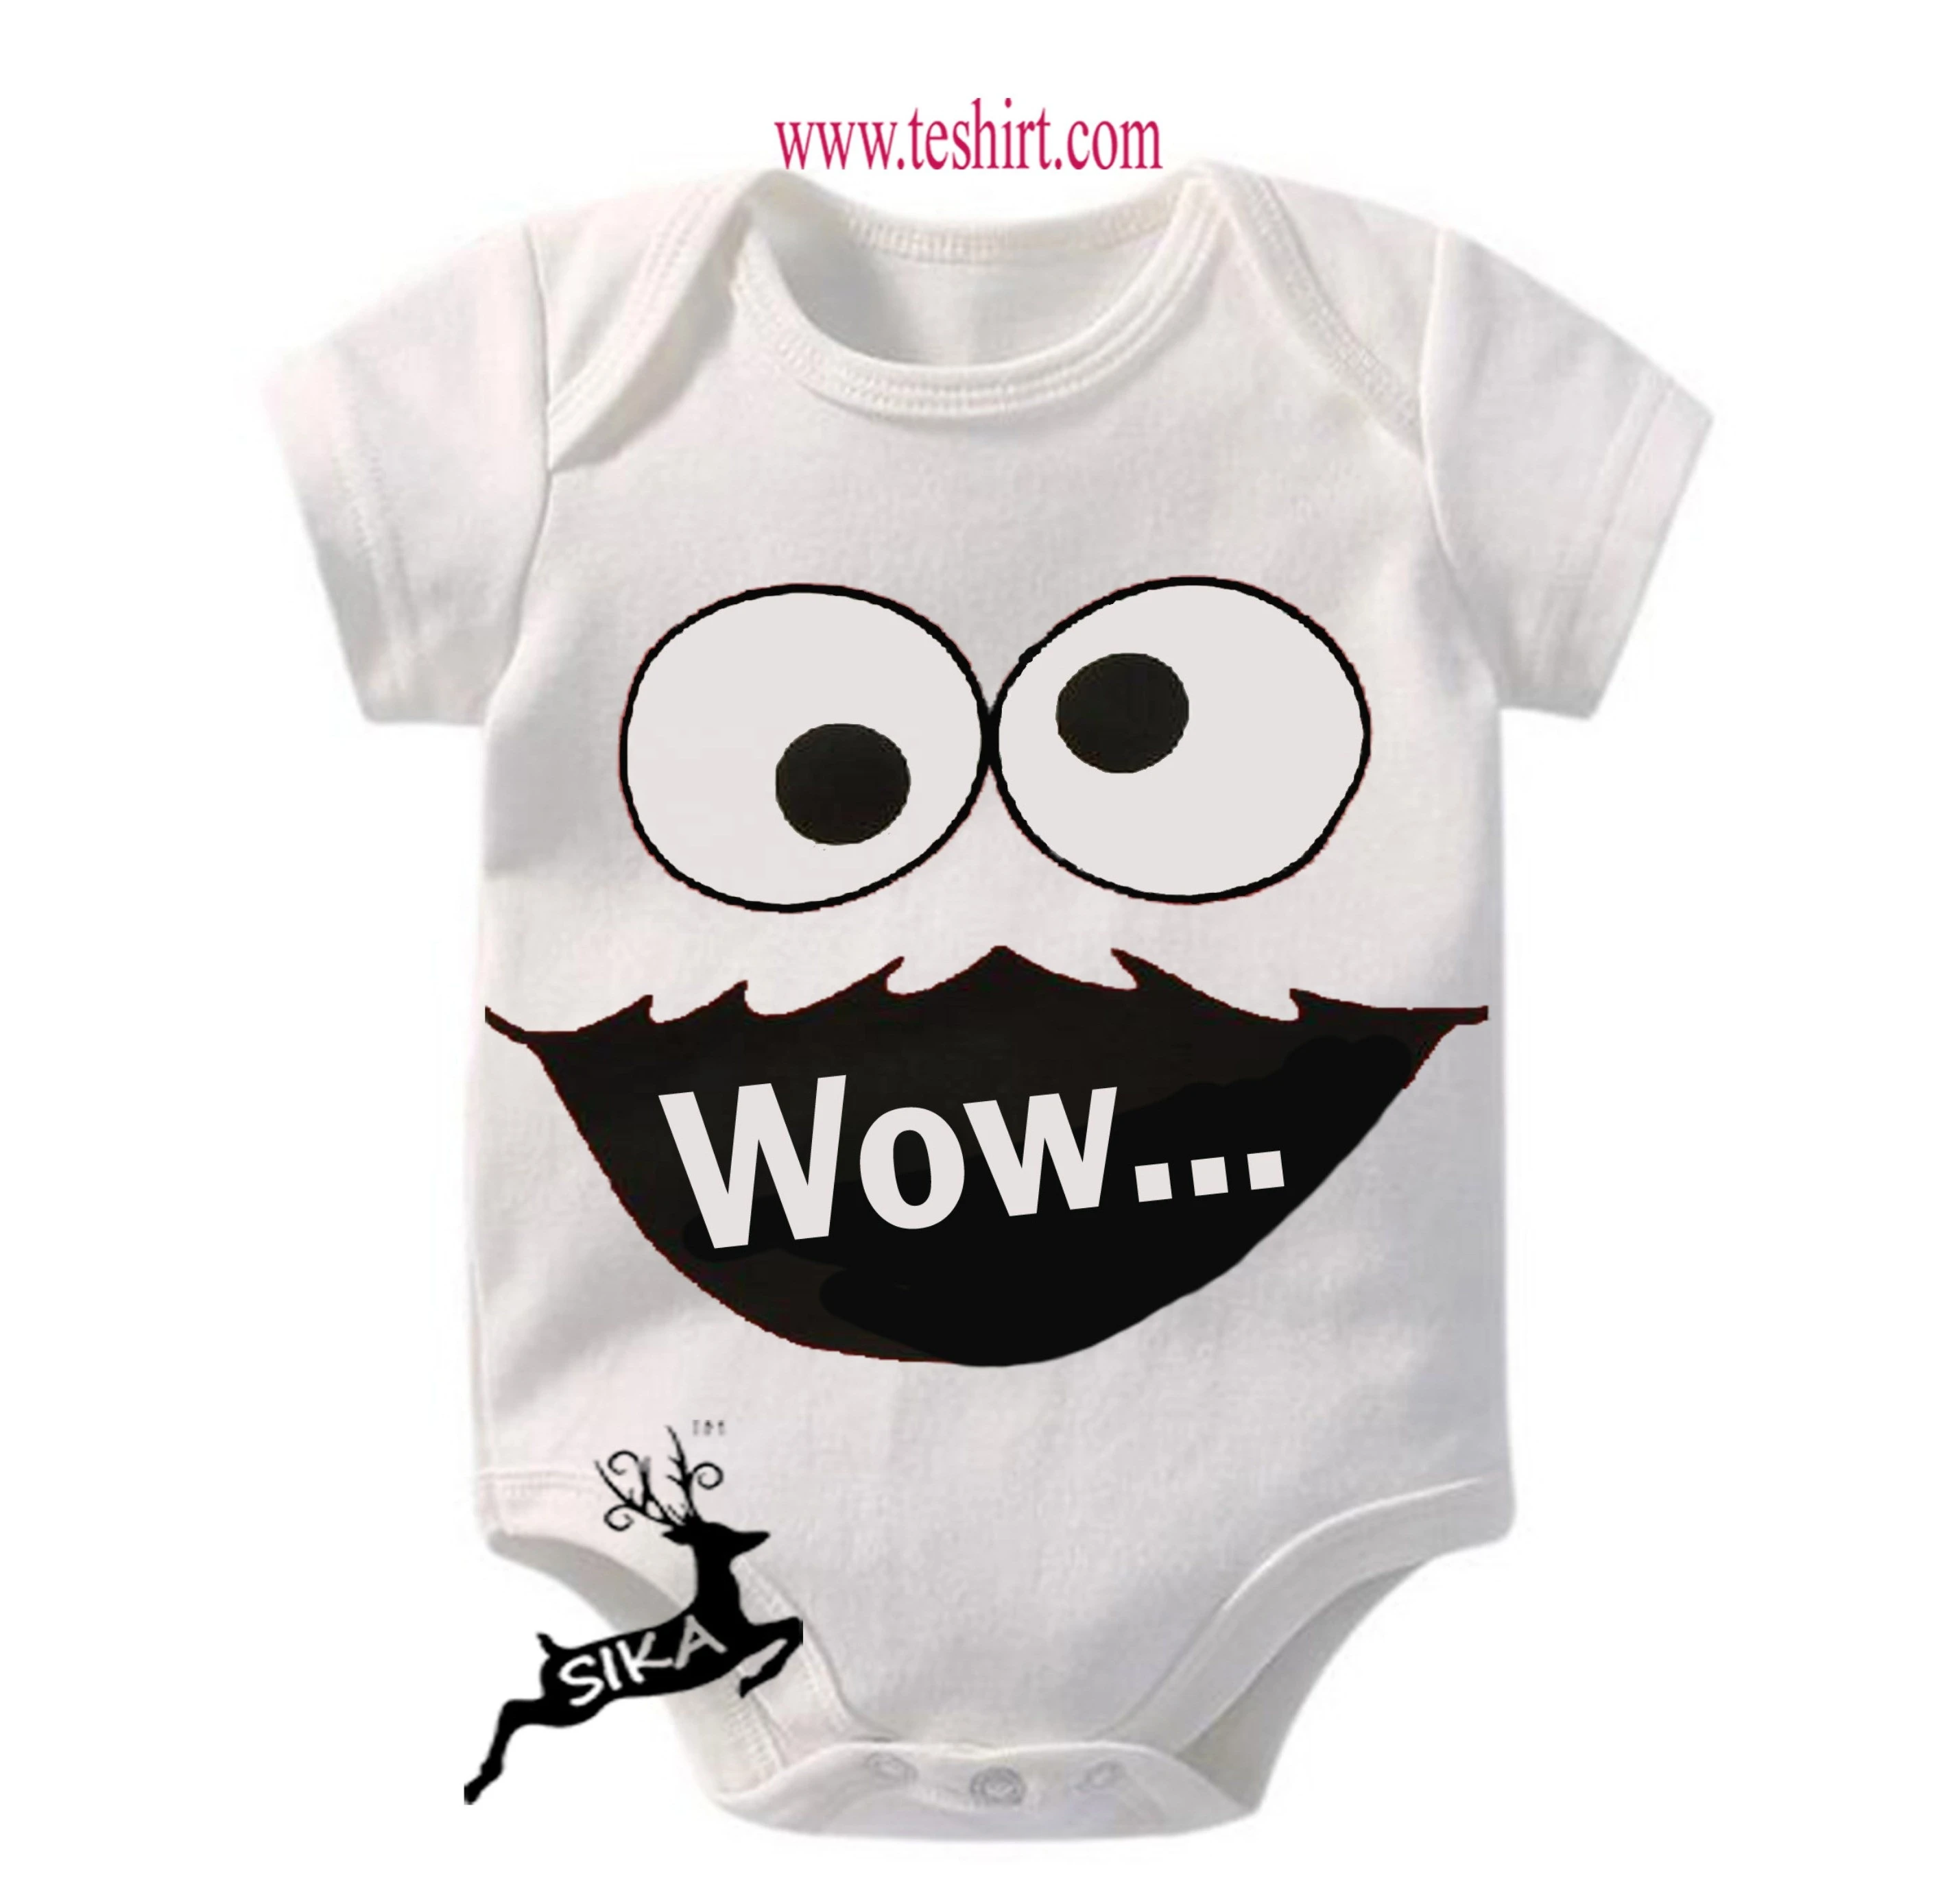 onesie/ropa de bebes Organic Cotton Baby Clothes Infant Boys Baby Romper Cotton Ribbed Toddler Clothing Bulk Sales Clothes